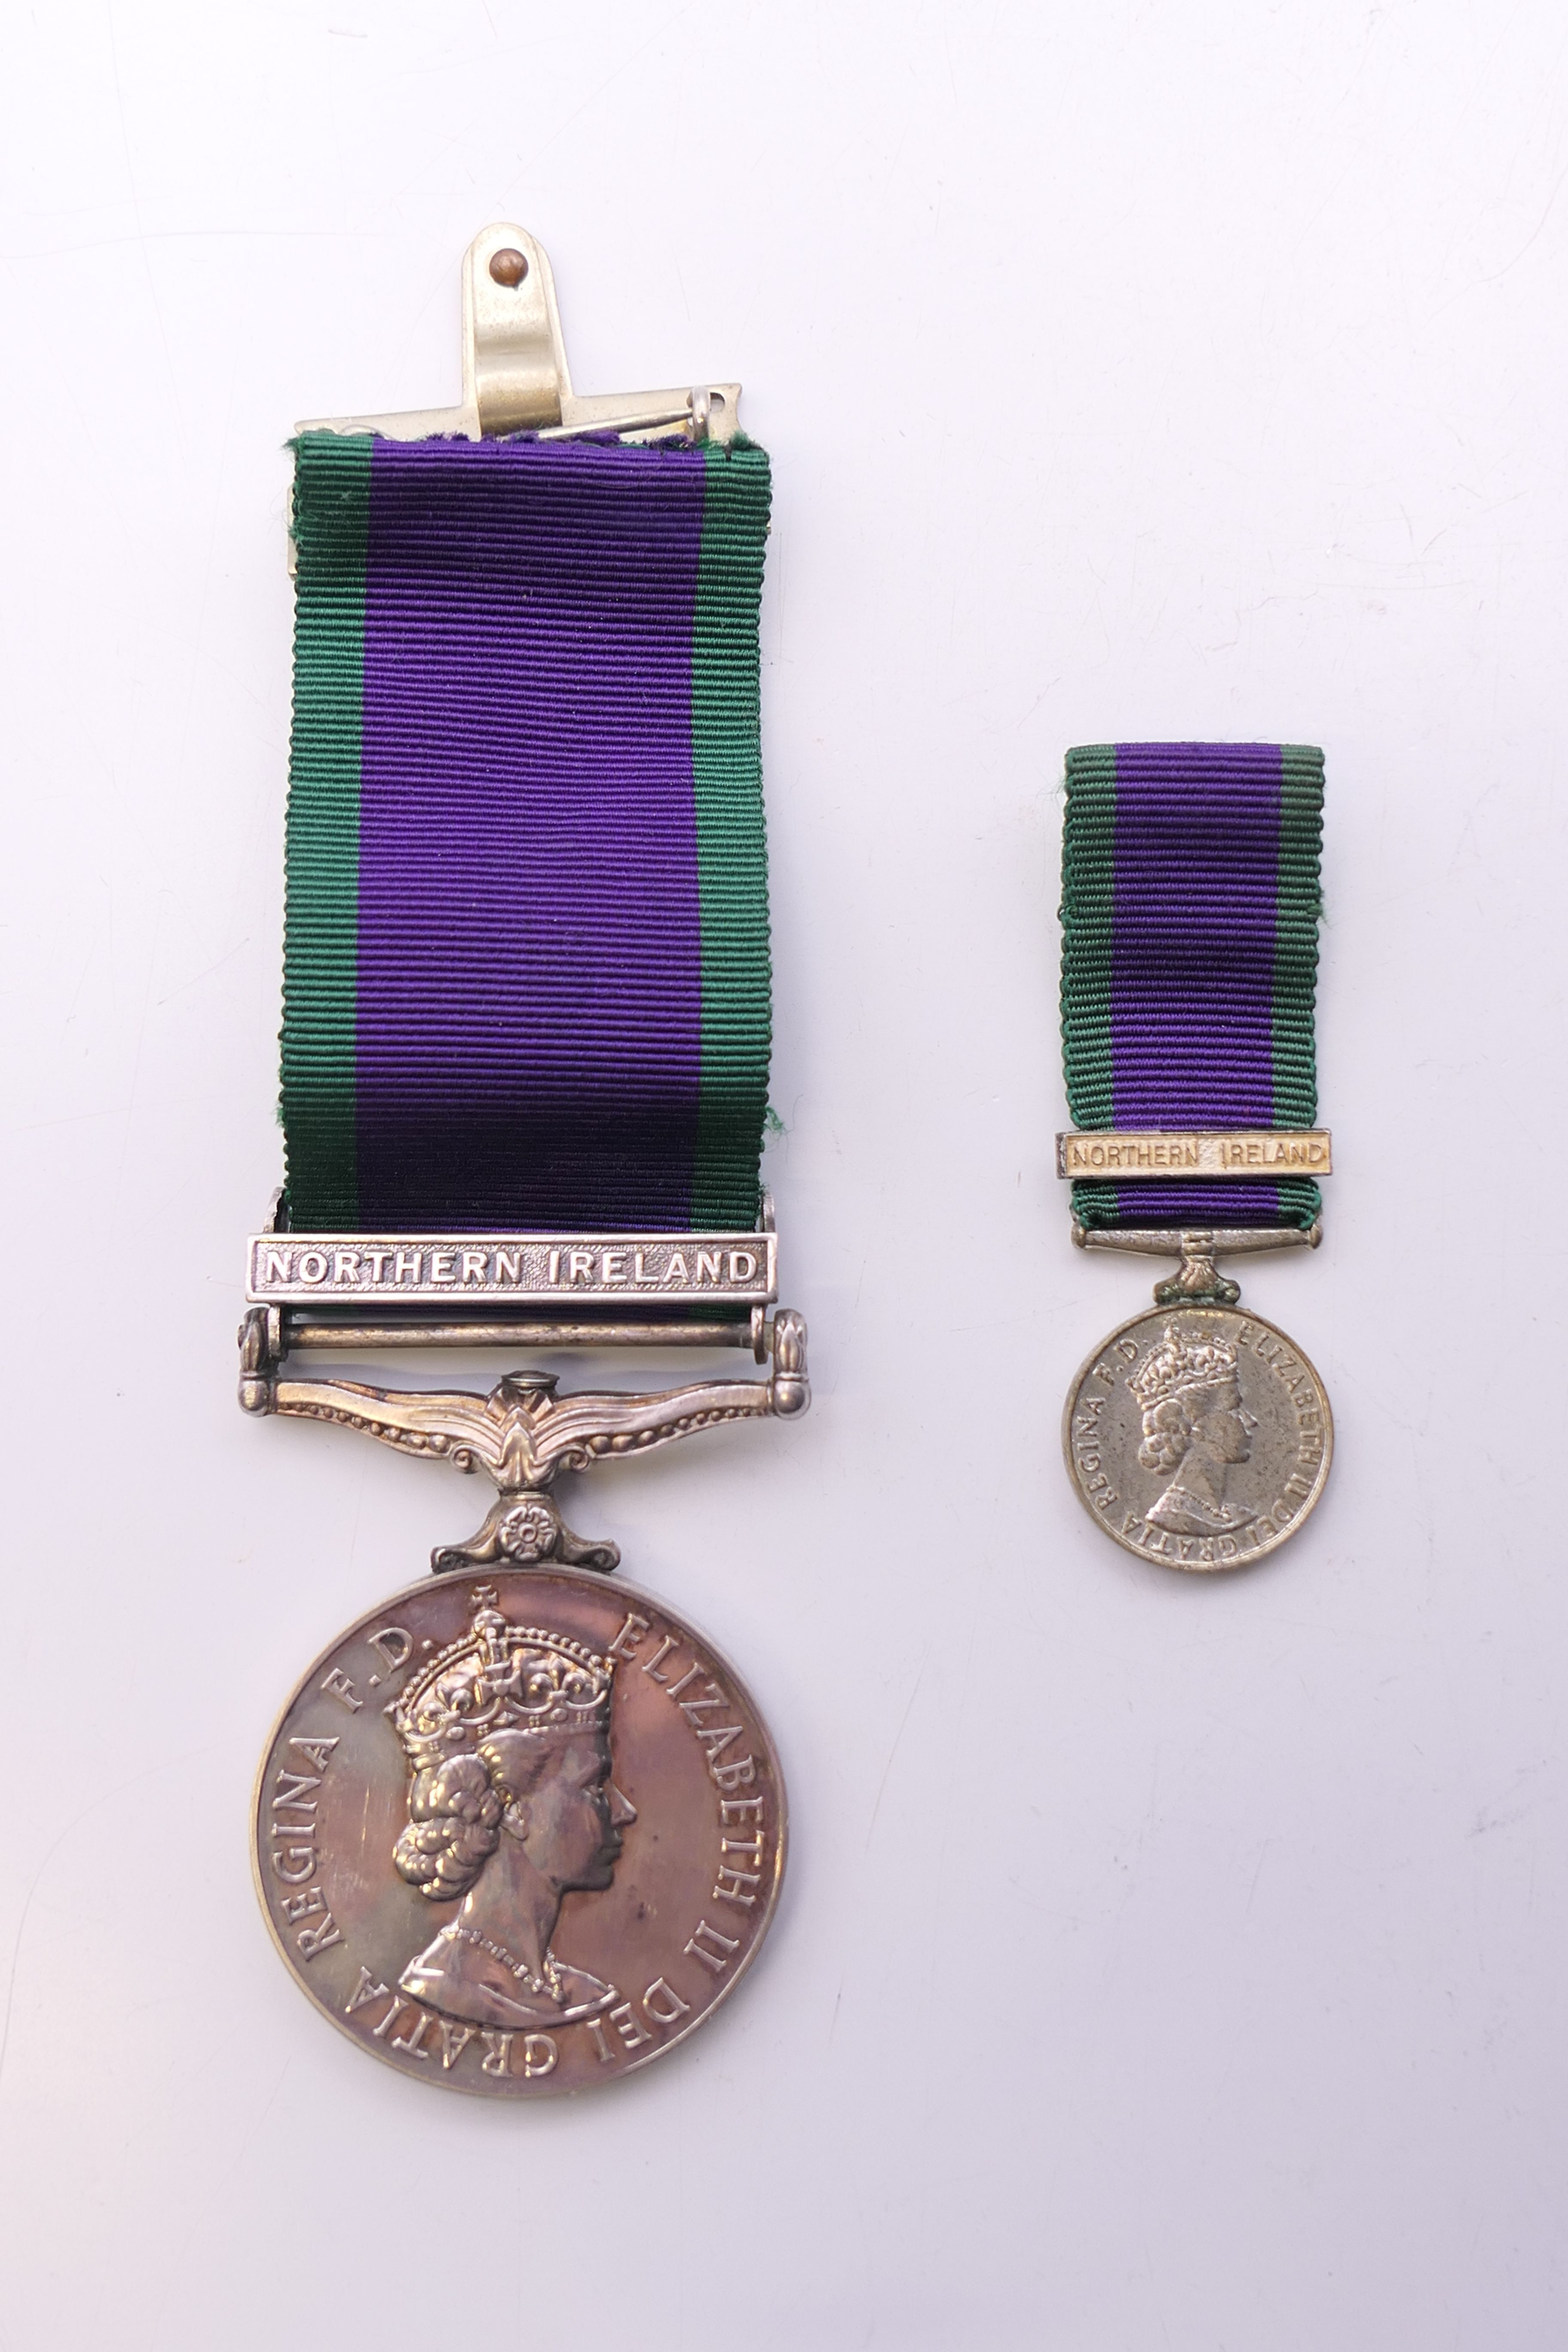 A Queen Elizabeth II Campaign medal with Northern Ireland bar and miniature,